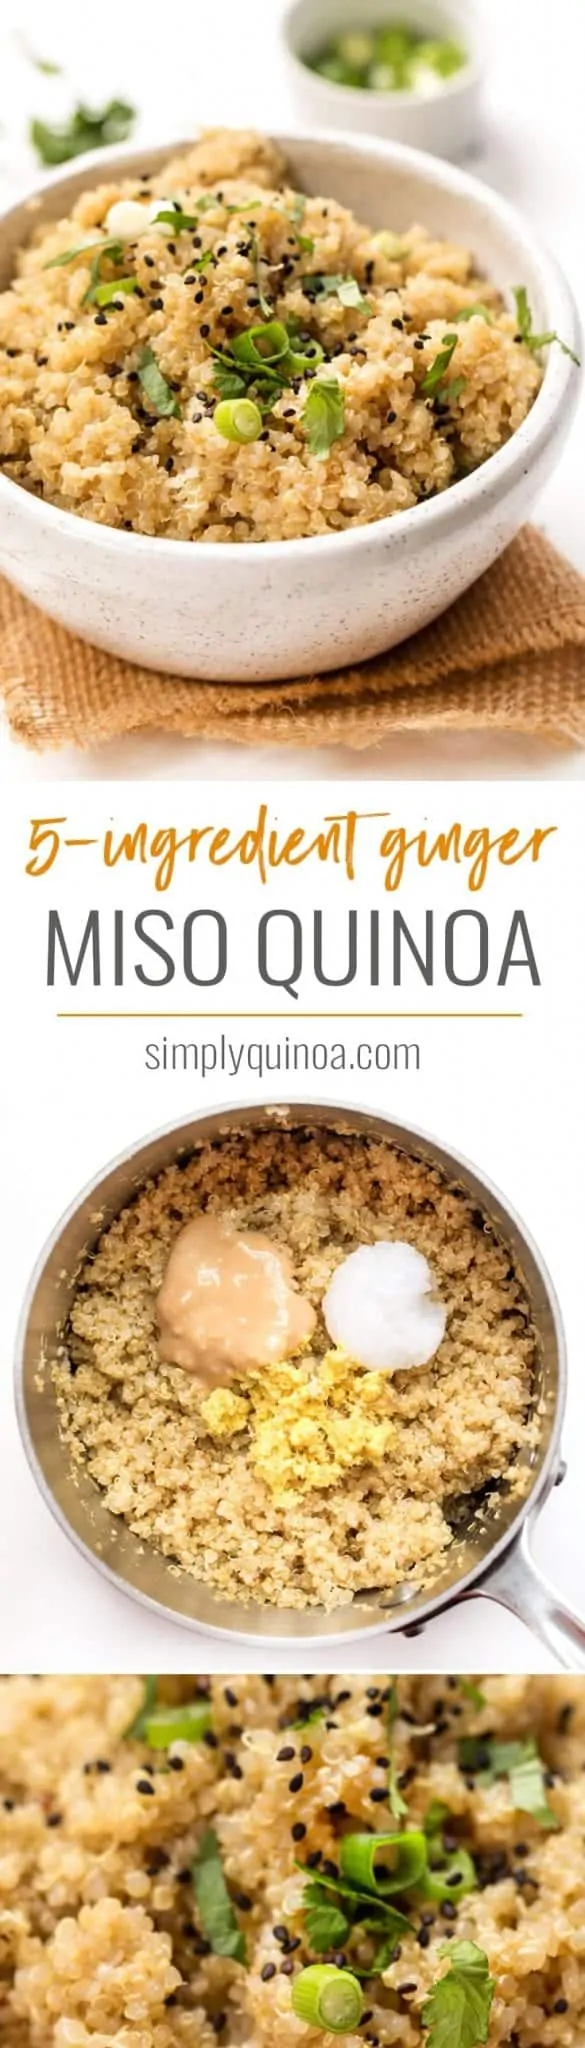 ginger miso quinoa recipe with only 5 ingredients